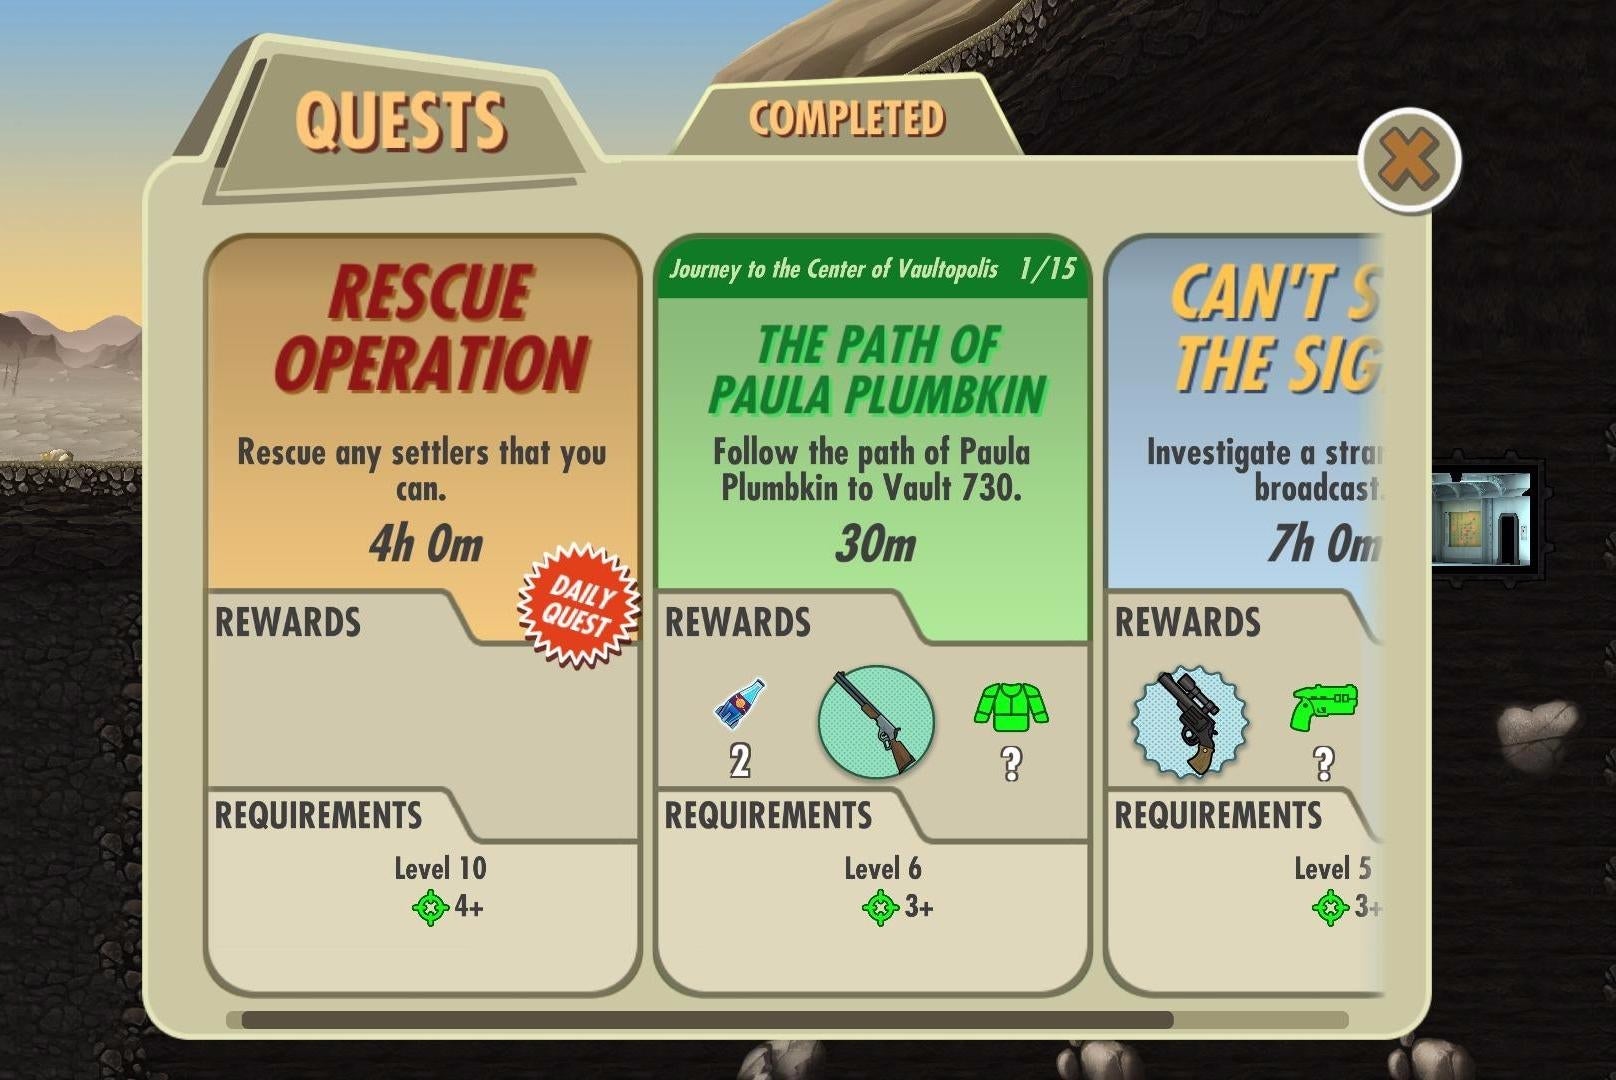 Image for Fallout Shelter - Quests, Combat Tips, Daily Quests and rewards explained